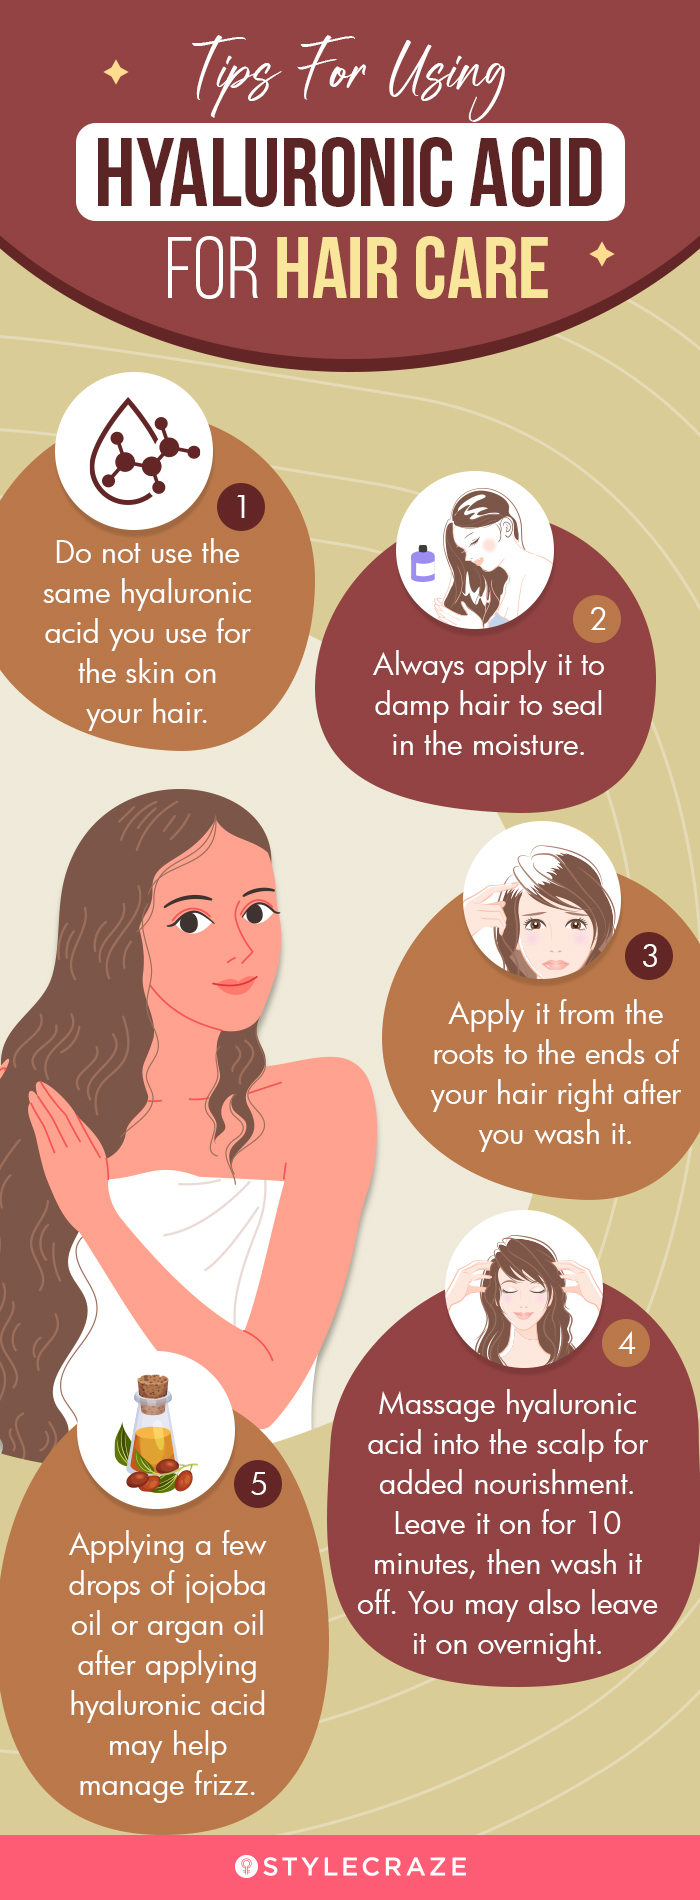 tips for using hyaluronic acid for hair care [infographic]